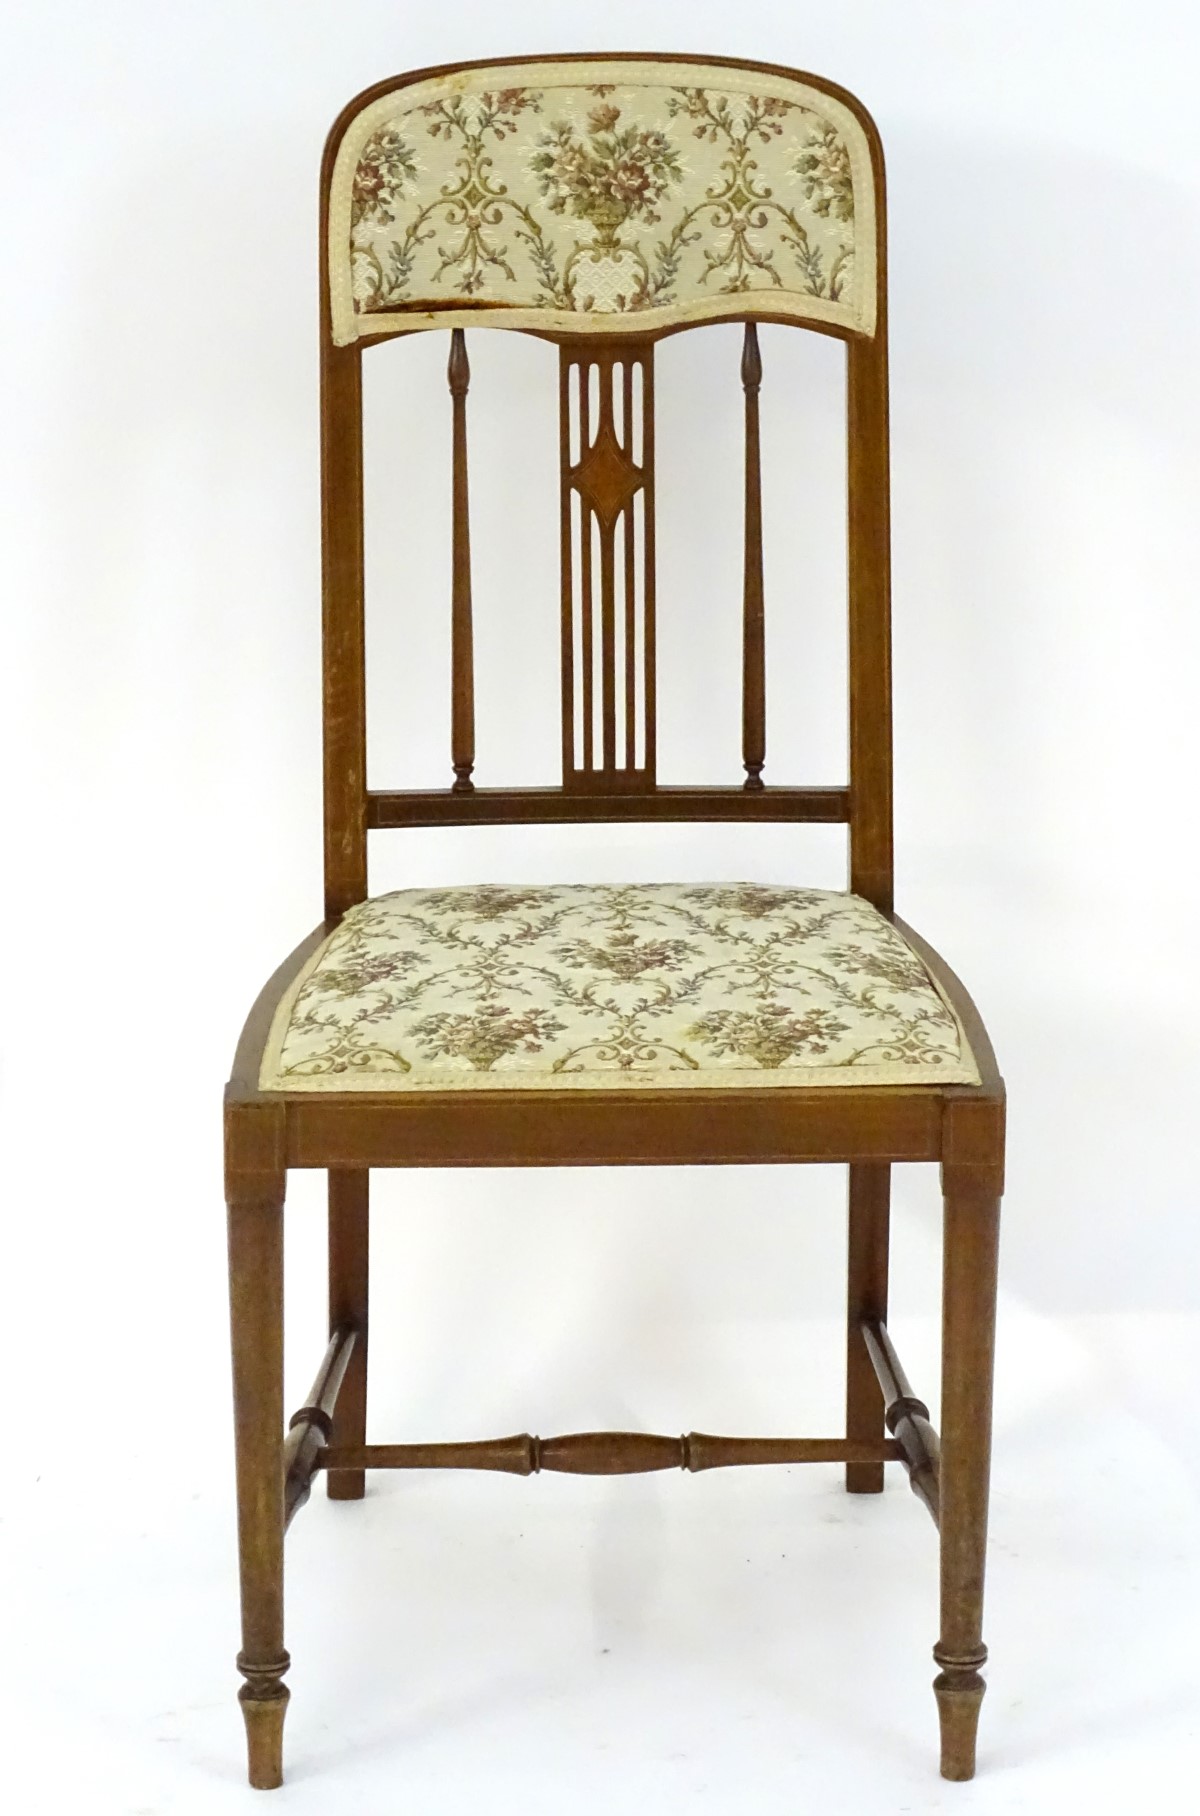 An early 20thC mahogany bedroom chair with a slatted backrest and inlaid decoration, - Image 3 of 9